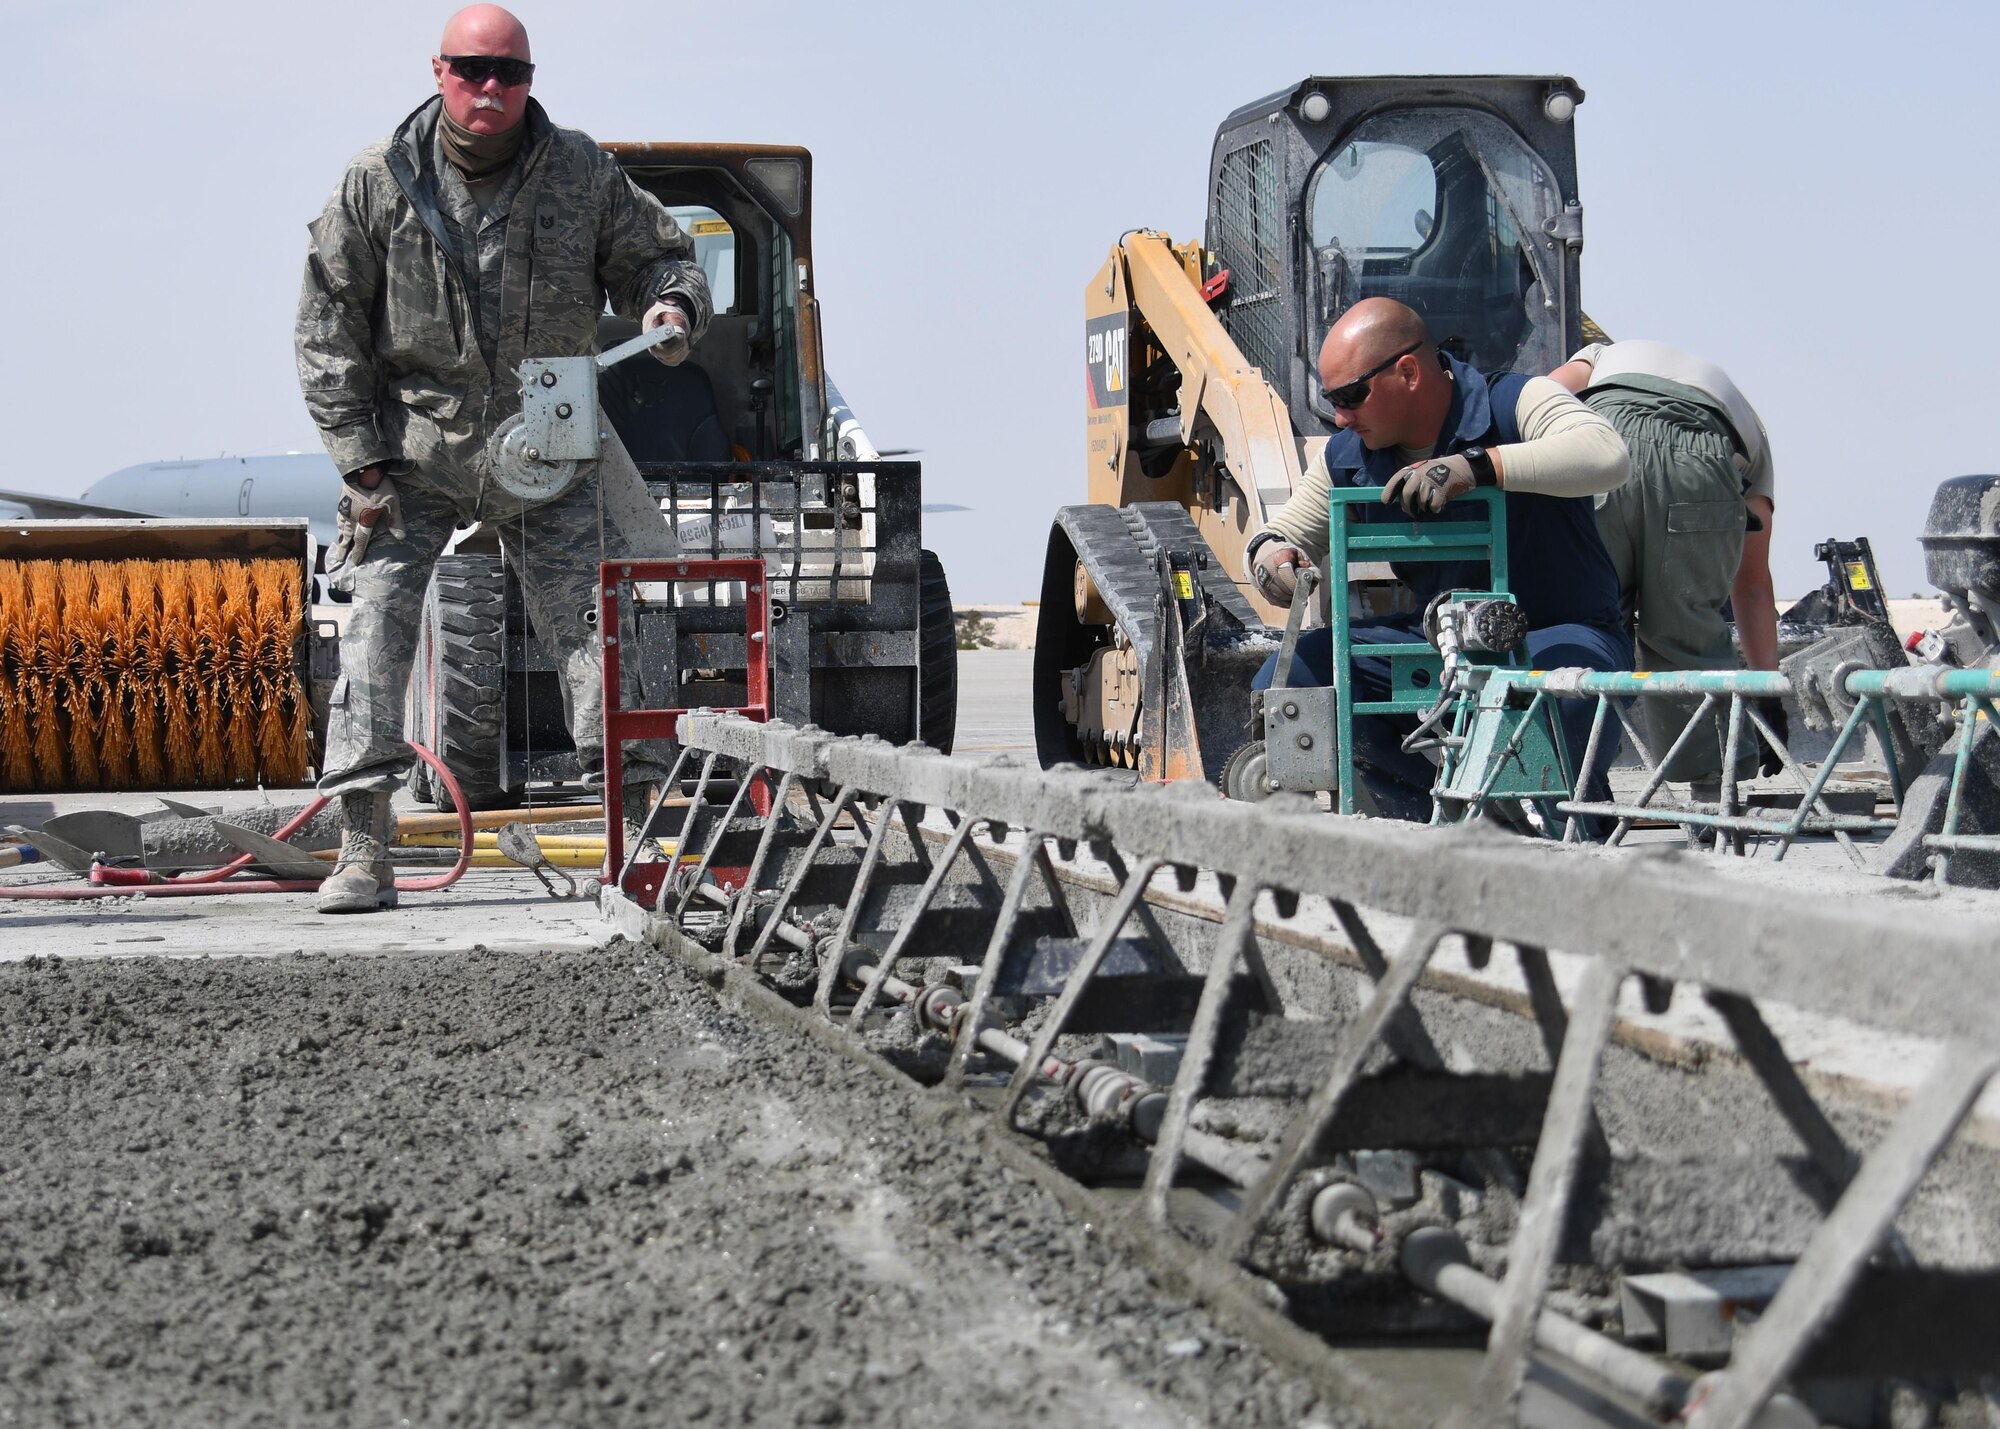 U.S. Air Force Tech. Sgt. Jonathan Bacon, a heavy equipment and constructions craftsman with the 379th Expeditionary Civil Engineer Squadron Pavements and Equipment Flight, cranks a lever on an A-frame screed at Al Udeid Air Base, Qatar, Feb. 21, 2017. The A-frame screed is a tool used for leveling concrete and settles the aggregate rock and gravel to the bottom of the mix while bringing the “paste” up to the top, allowing for a smooth finish.  (U.S. Air Force photo by Senior Airman Miles Wilson)